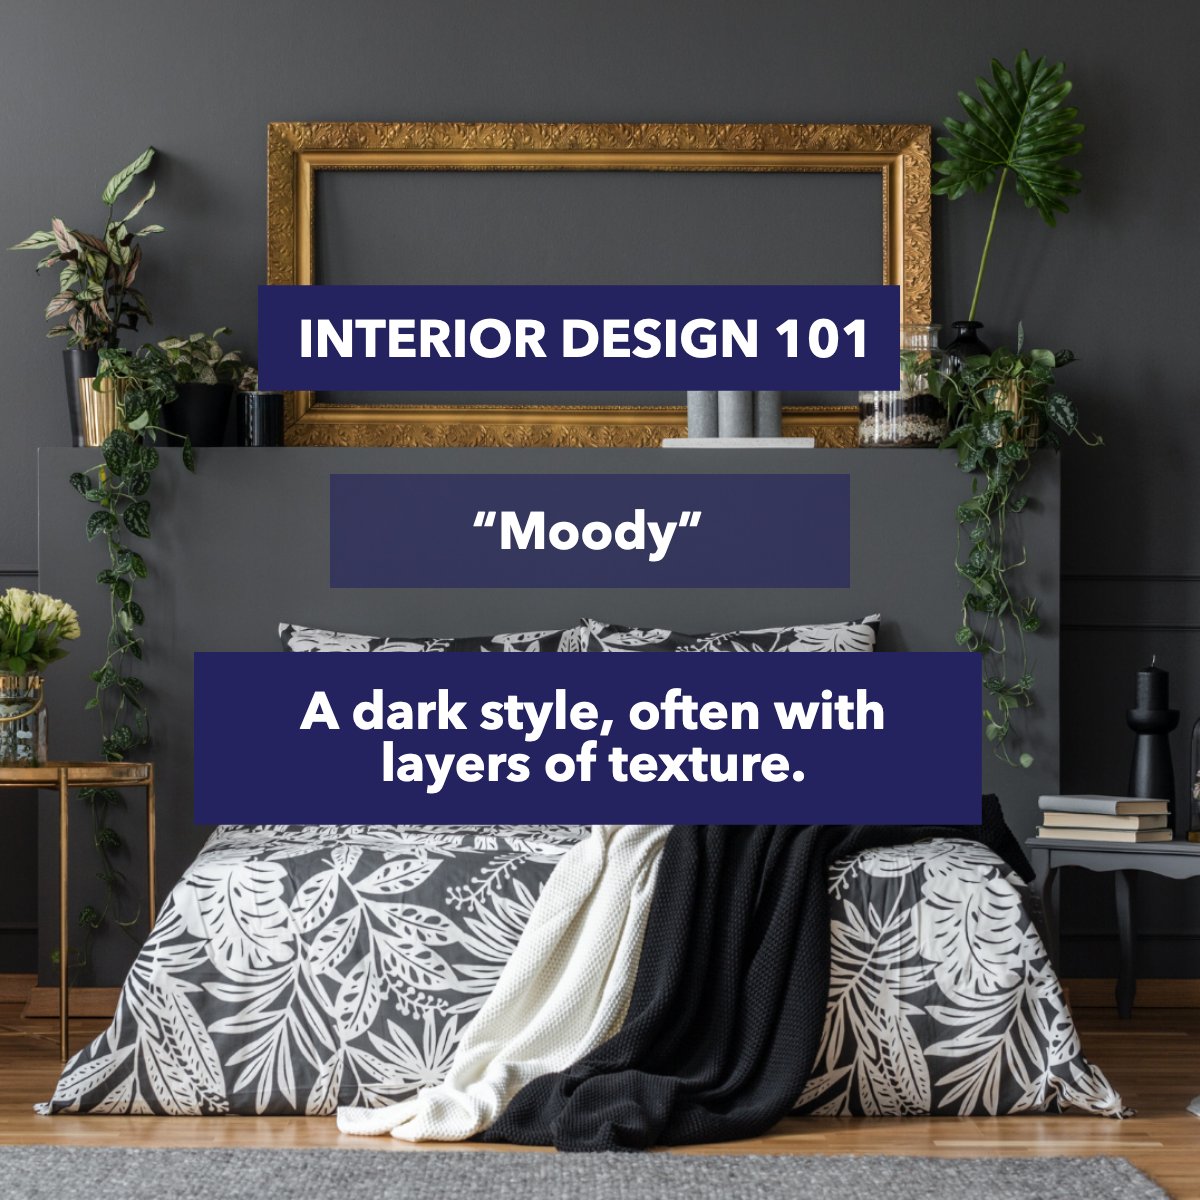 Moody is not only a mood is a style in interior design. 

Are you feeling moody? 

#interiorsdesign #interiortrends #interiordesigning #interiordesigntrends #interiorsaddict #interiordesigntips #interiordesigngoals 
 #OhioRealEstate #AkronRealtor #CantonRealtor